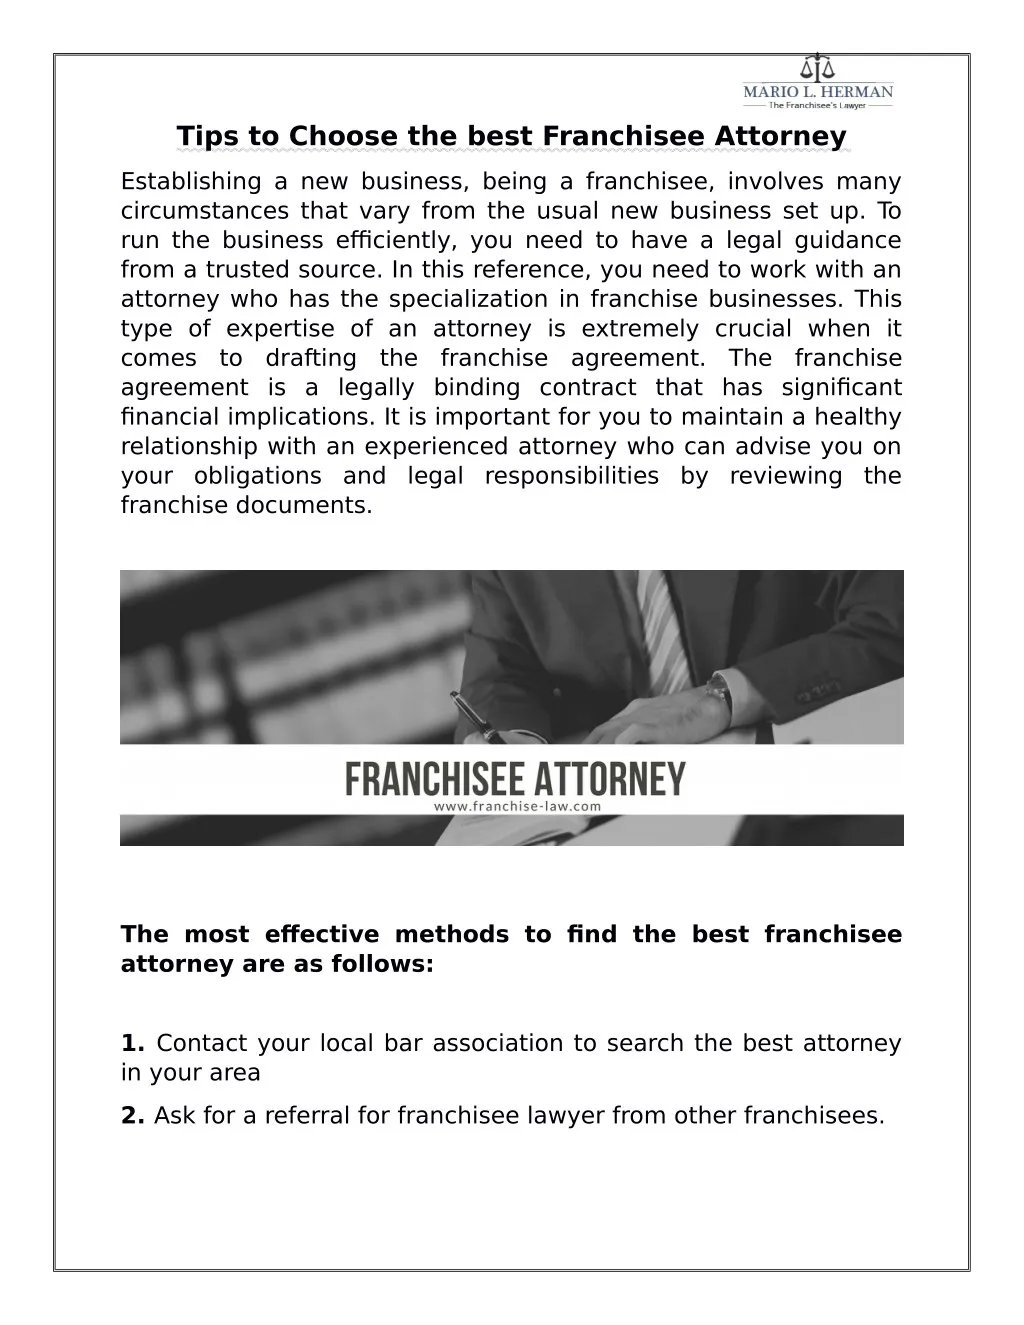 tips to choose the best franchisee attorney